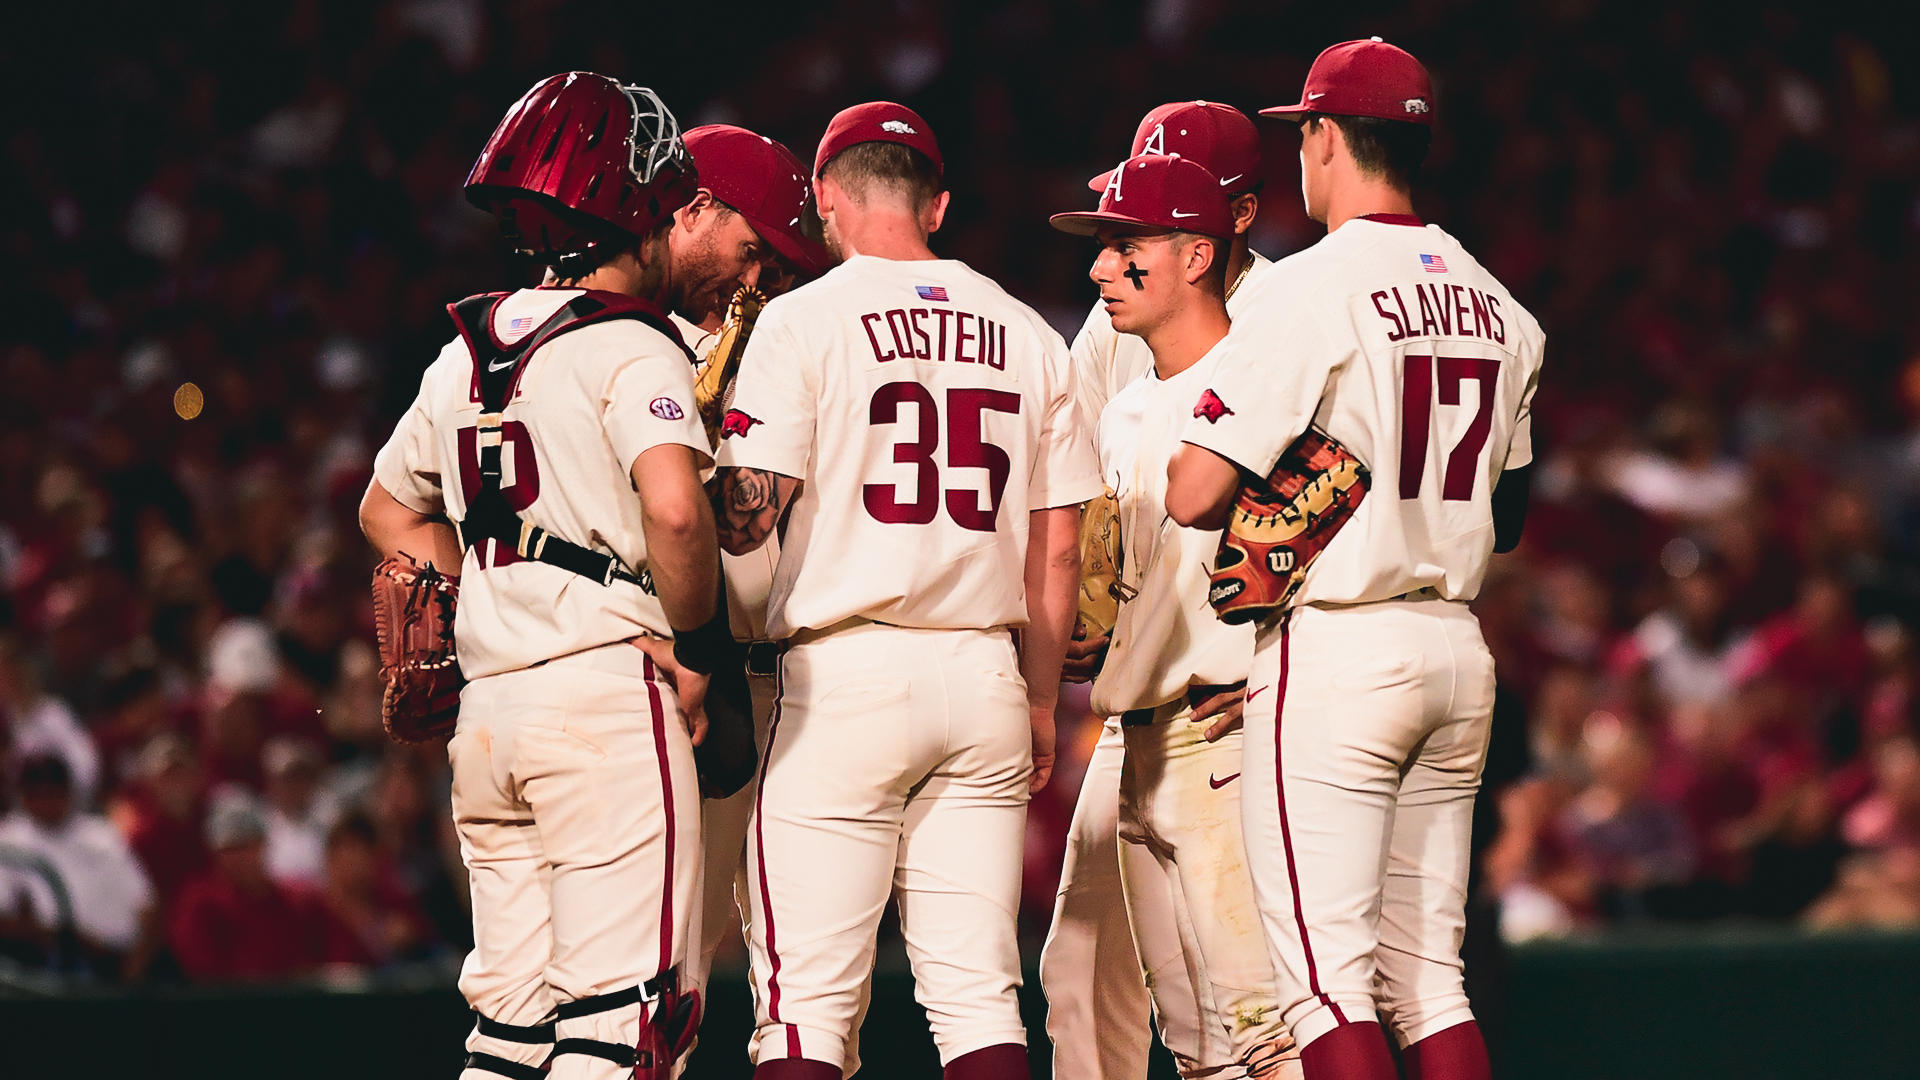 Hogs Hurt by Errors; Winner-Take-All Game Set for 6 p.m